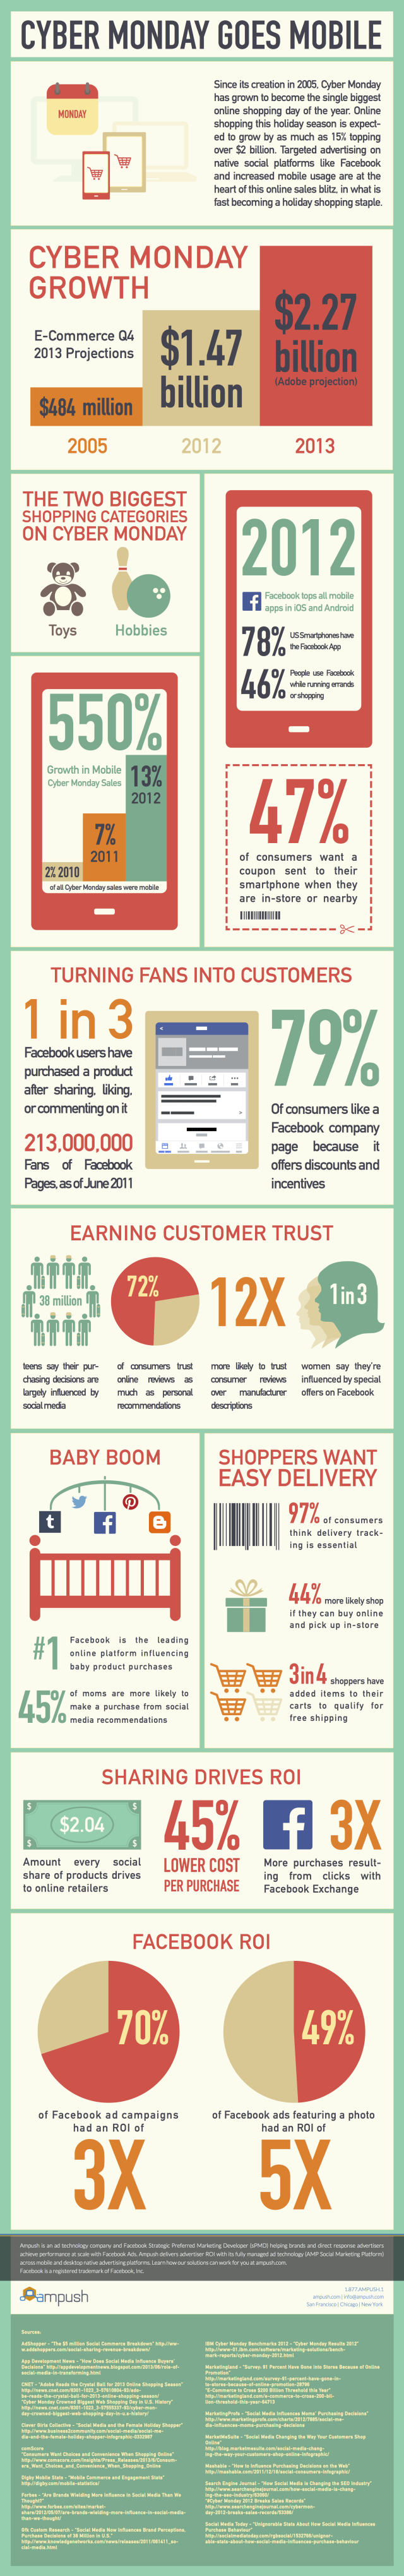 Cyber Monday report, mobile infographic